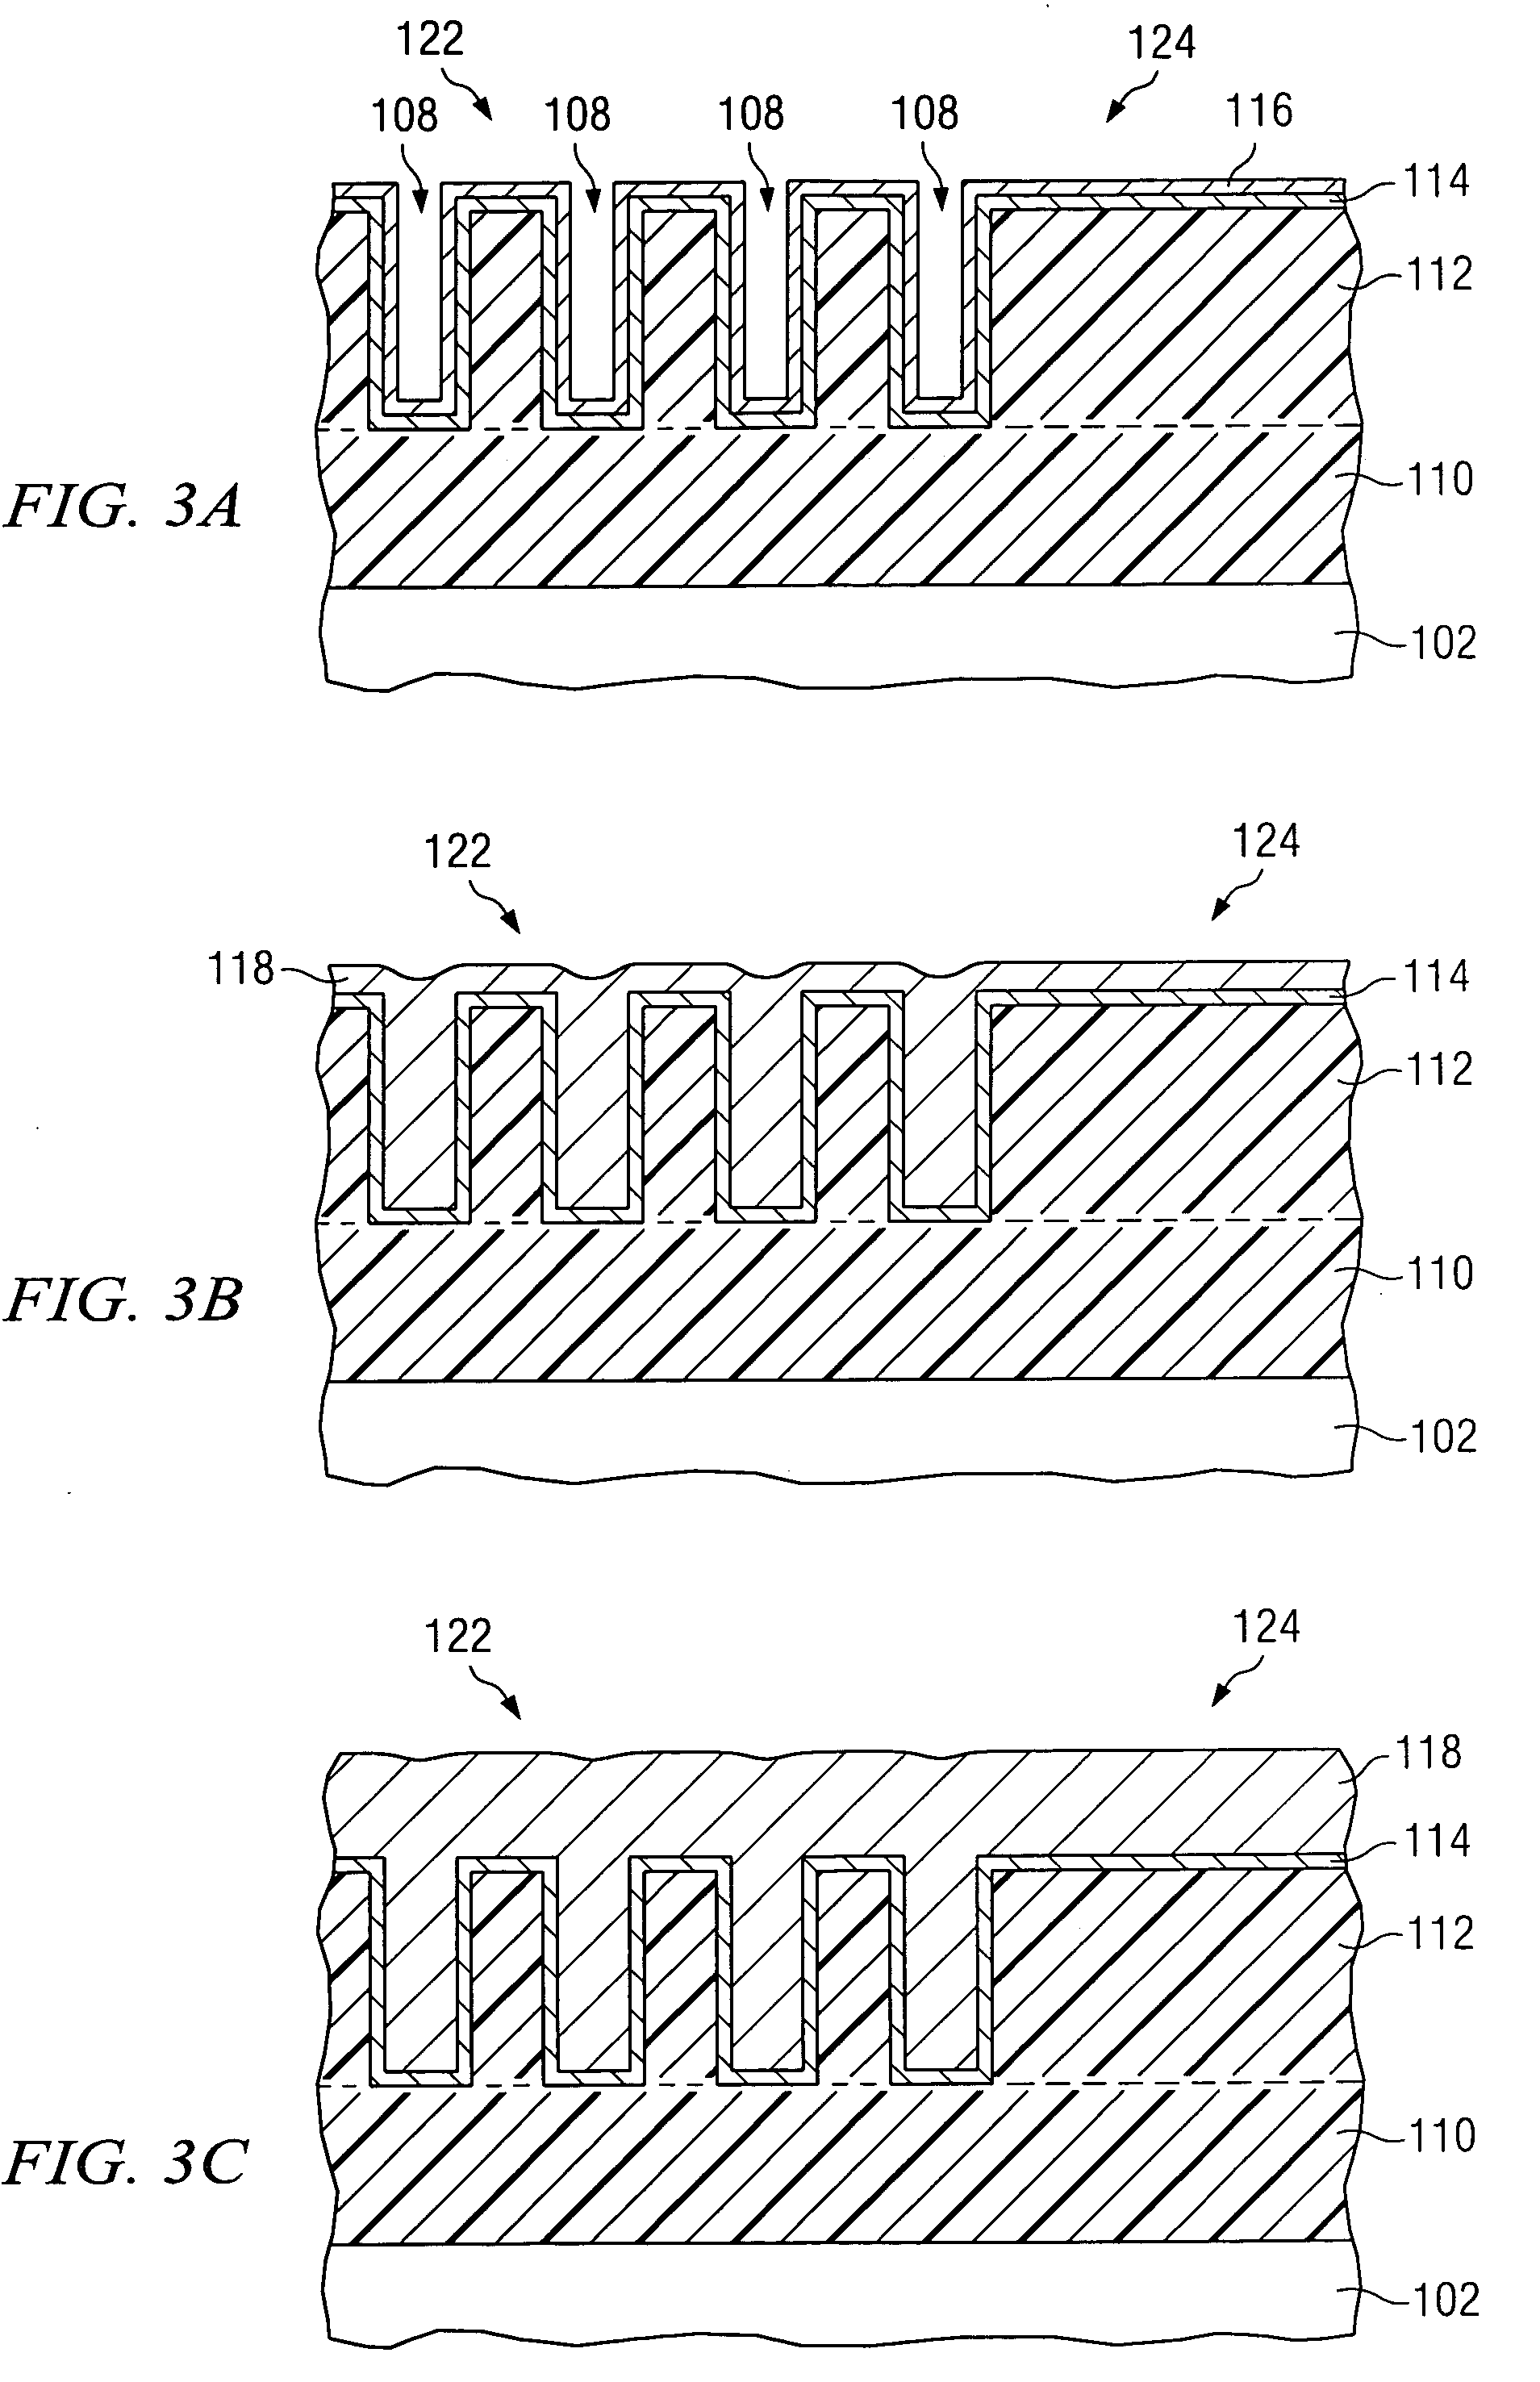 Plating-rinse-plating process for fabricating copper interconnects